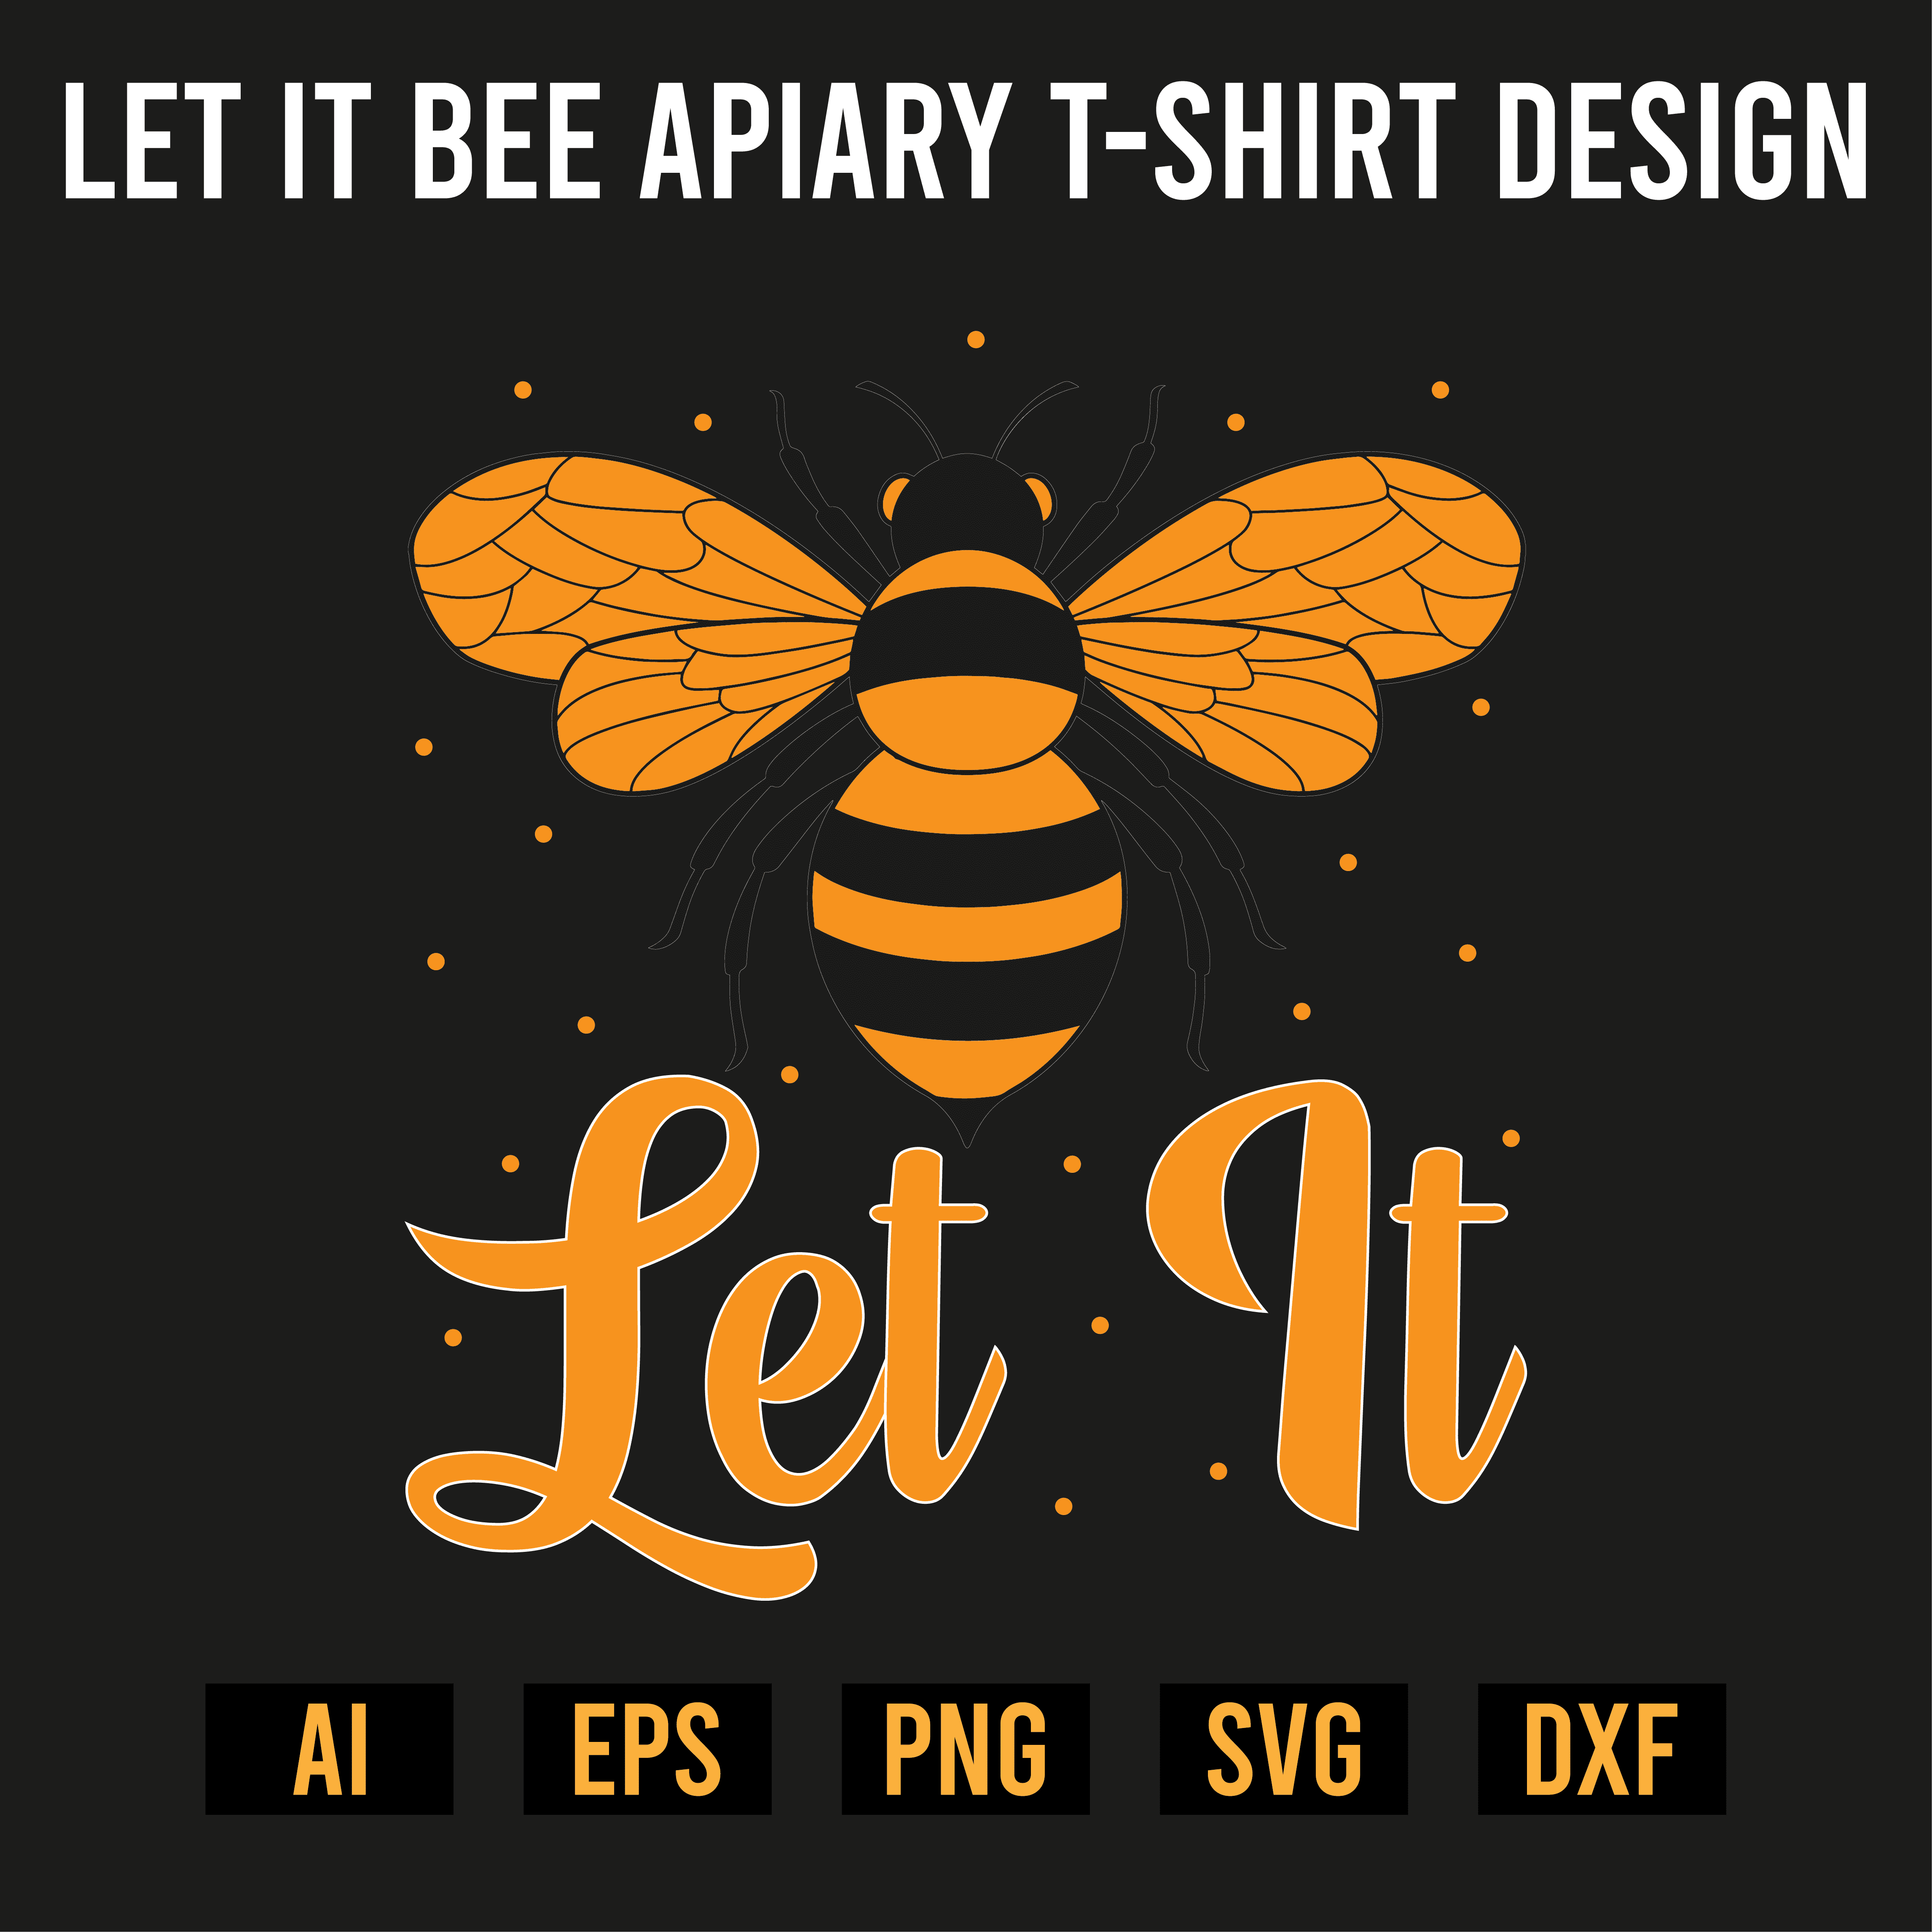 Let It Bee Apiary T- Shirt Design cover image.